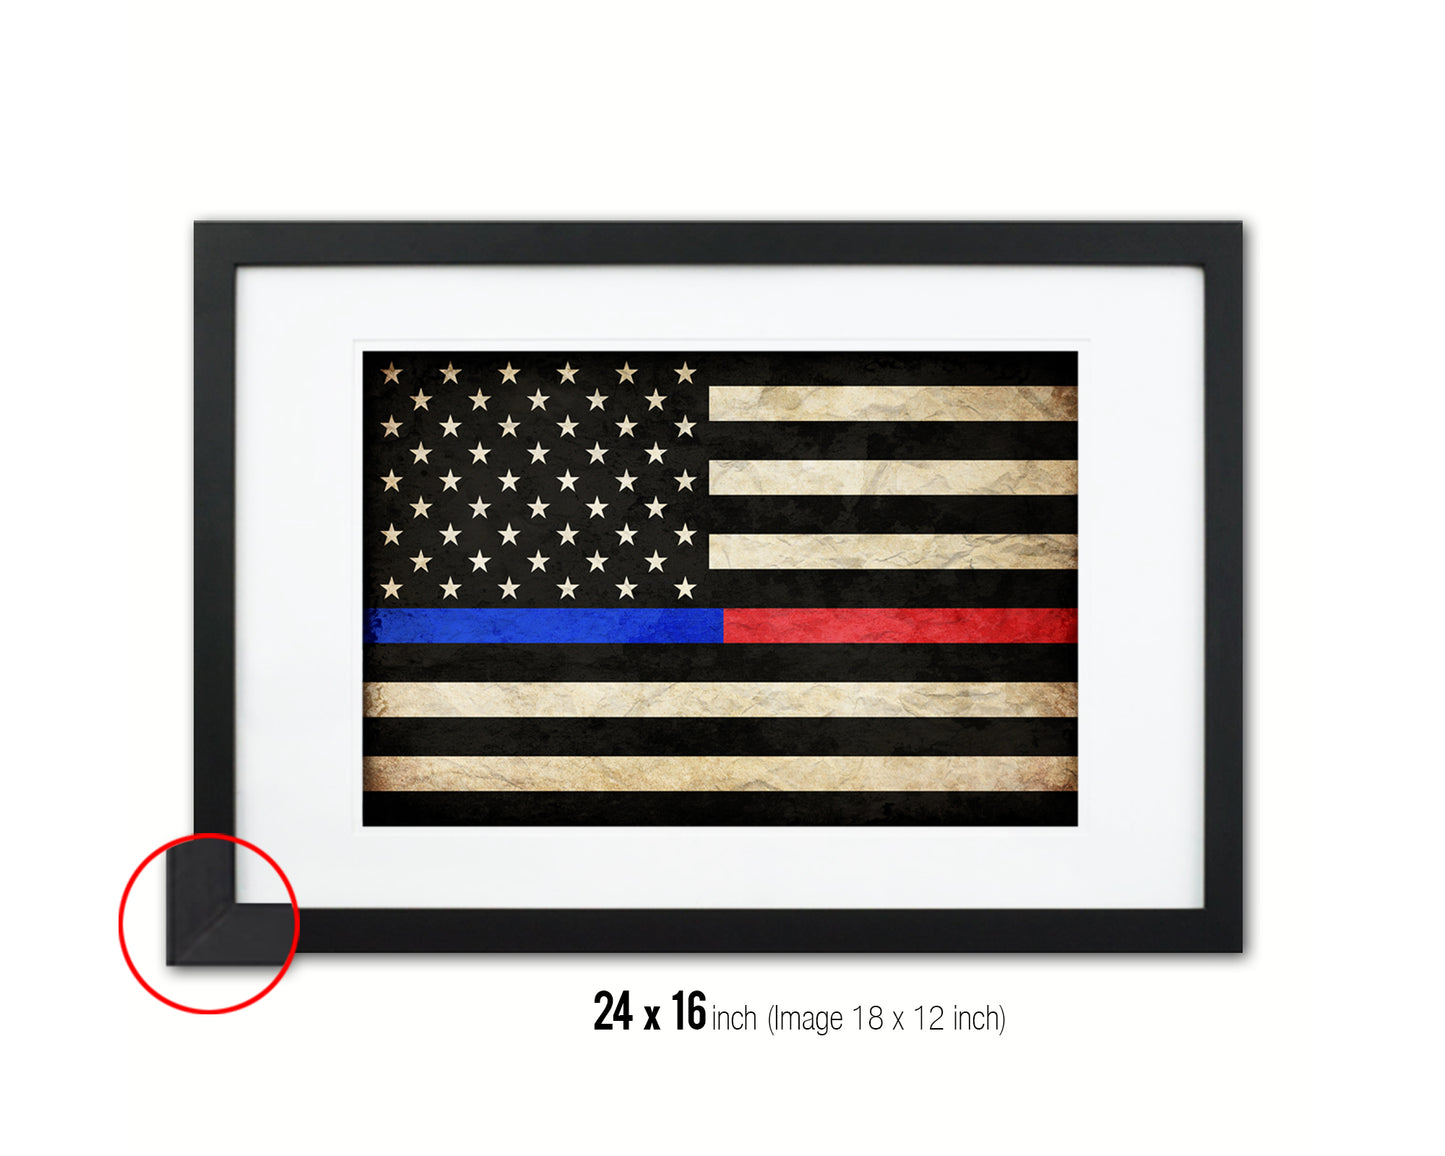 Thin Blue Line Police & Thin Red Line Firefighter Respect & Honor Law Enforcement Vintage Military Flag Art